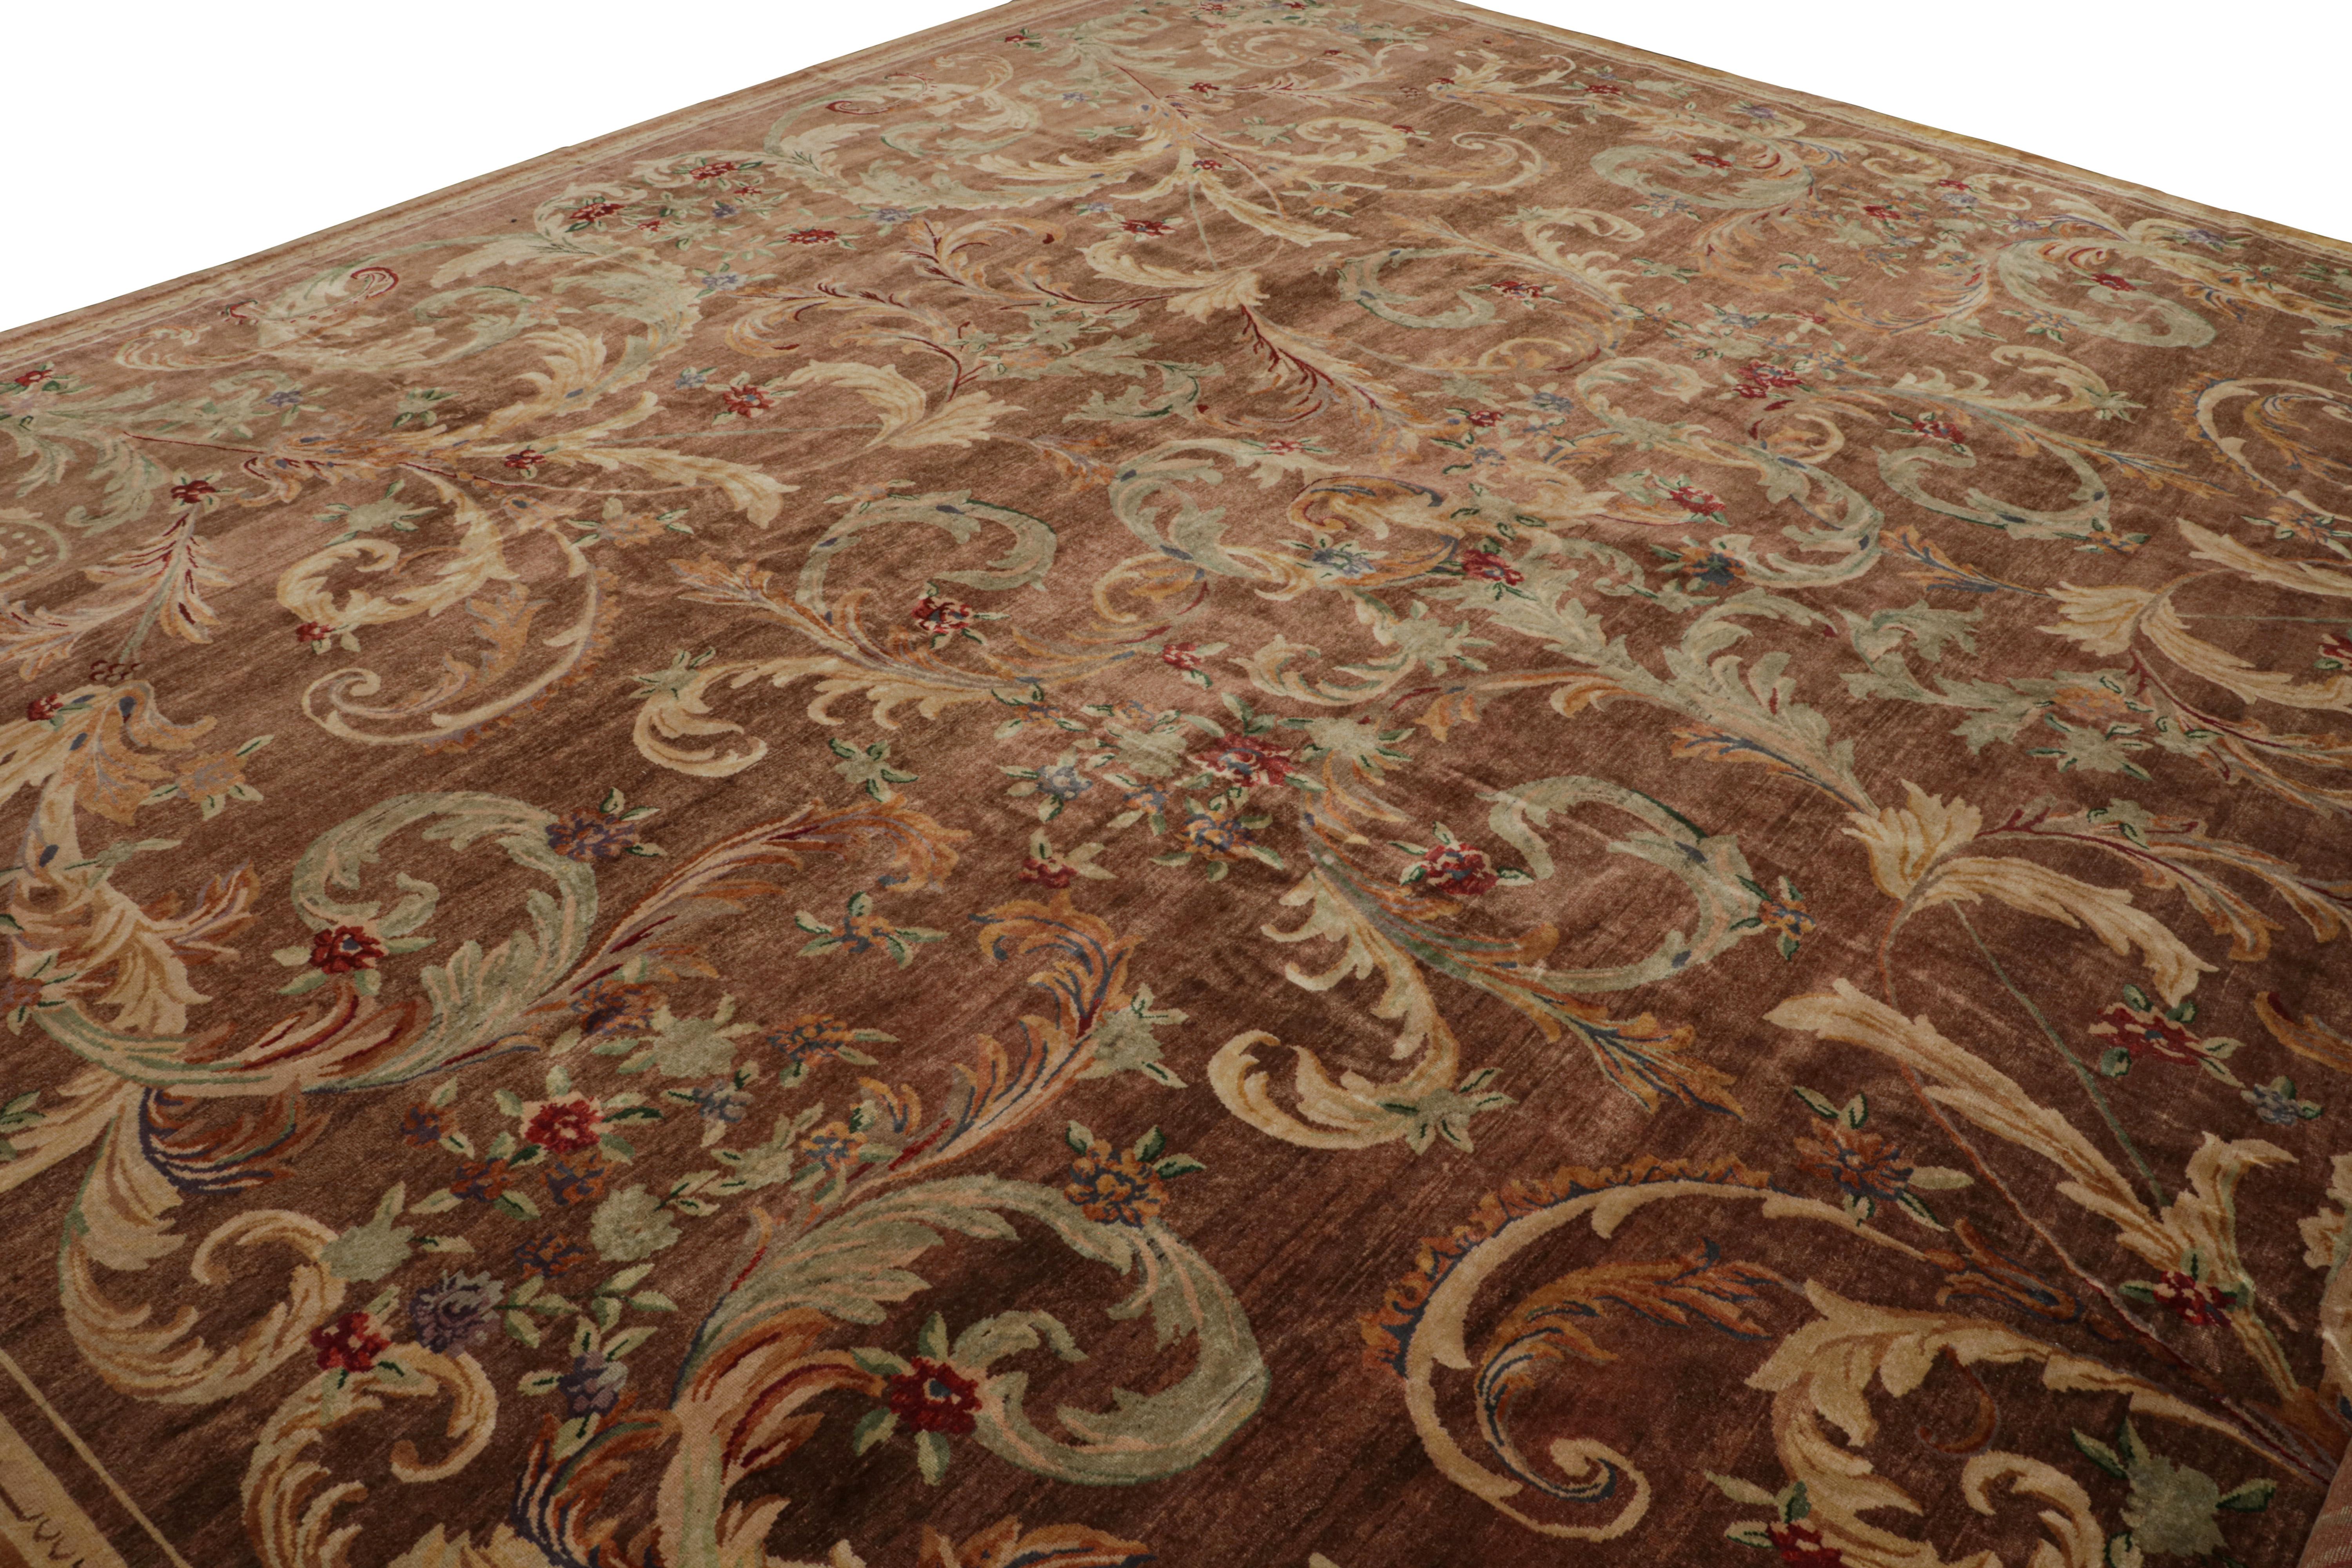 Hand-knotted in wool, this rare 18x19 vintage oversized French Savonnerie rug features a rich brown field and colorful floral pattern in a most unusual style that’s drawn from the border inward. 

On the Design: 

One of the richest examples of the